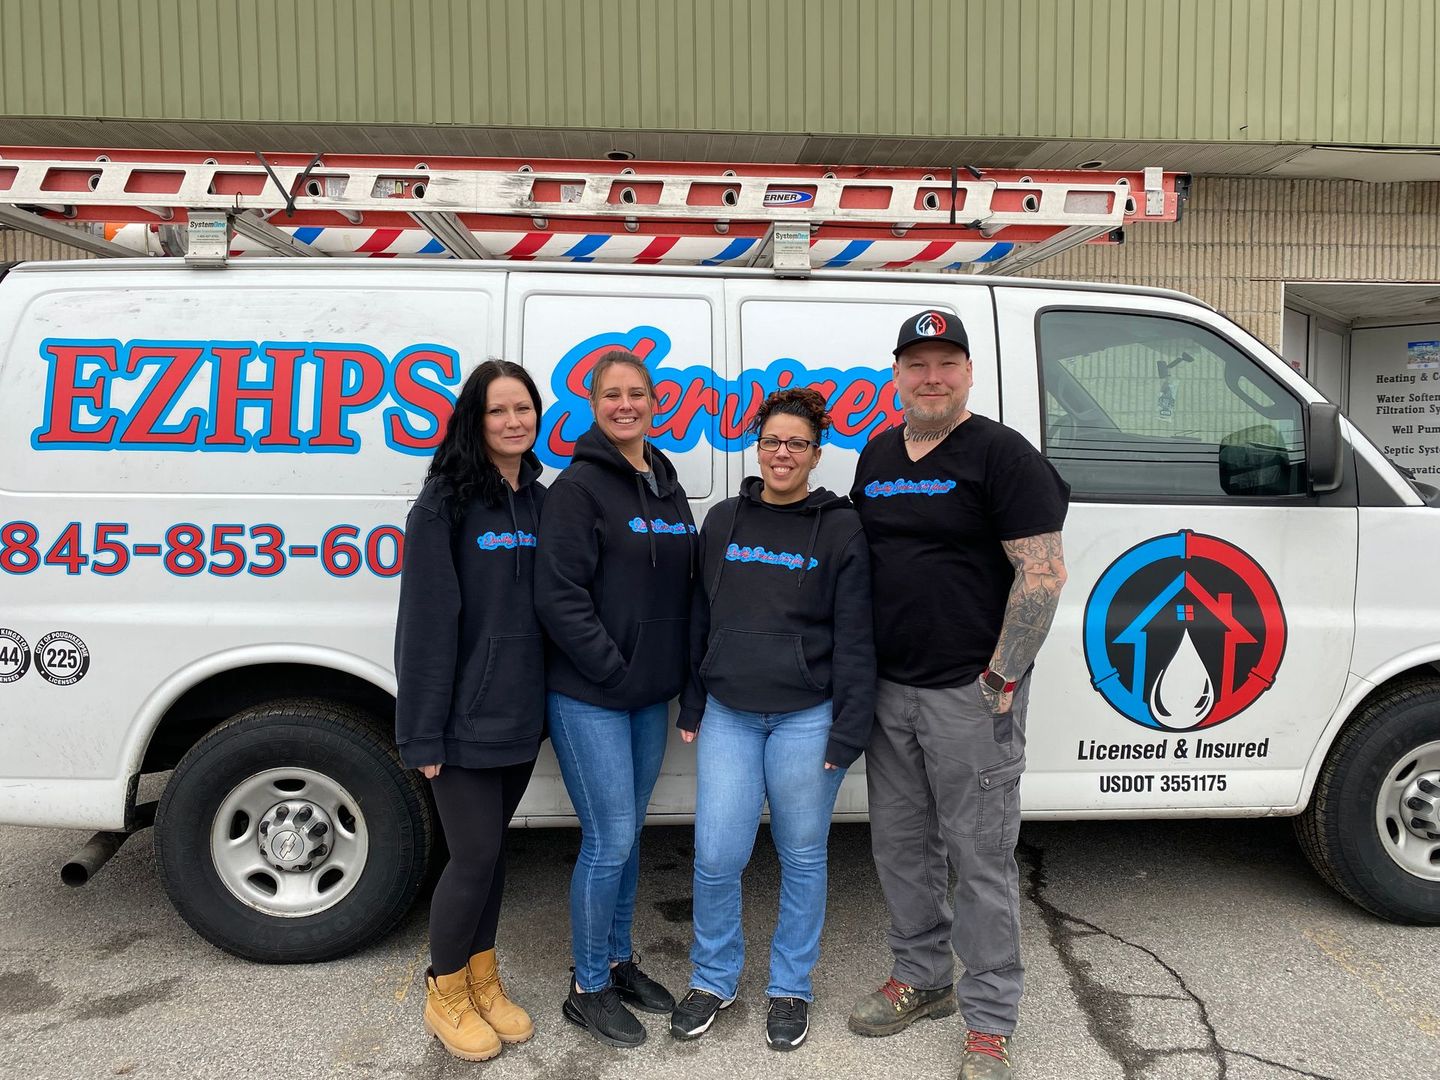 EZ HPS Services | Kingston, NY | The friendliest group of Plumbing and HVAC Technicians in all of Ulster County